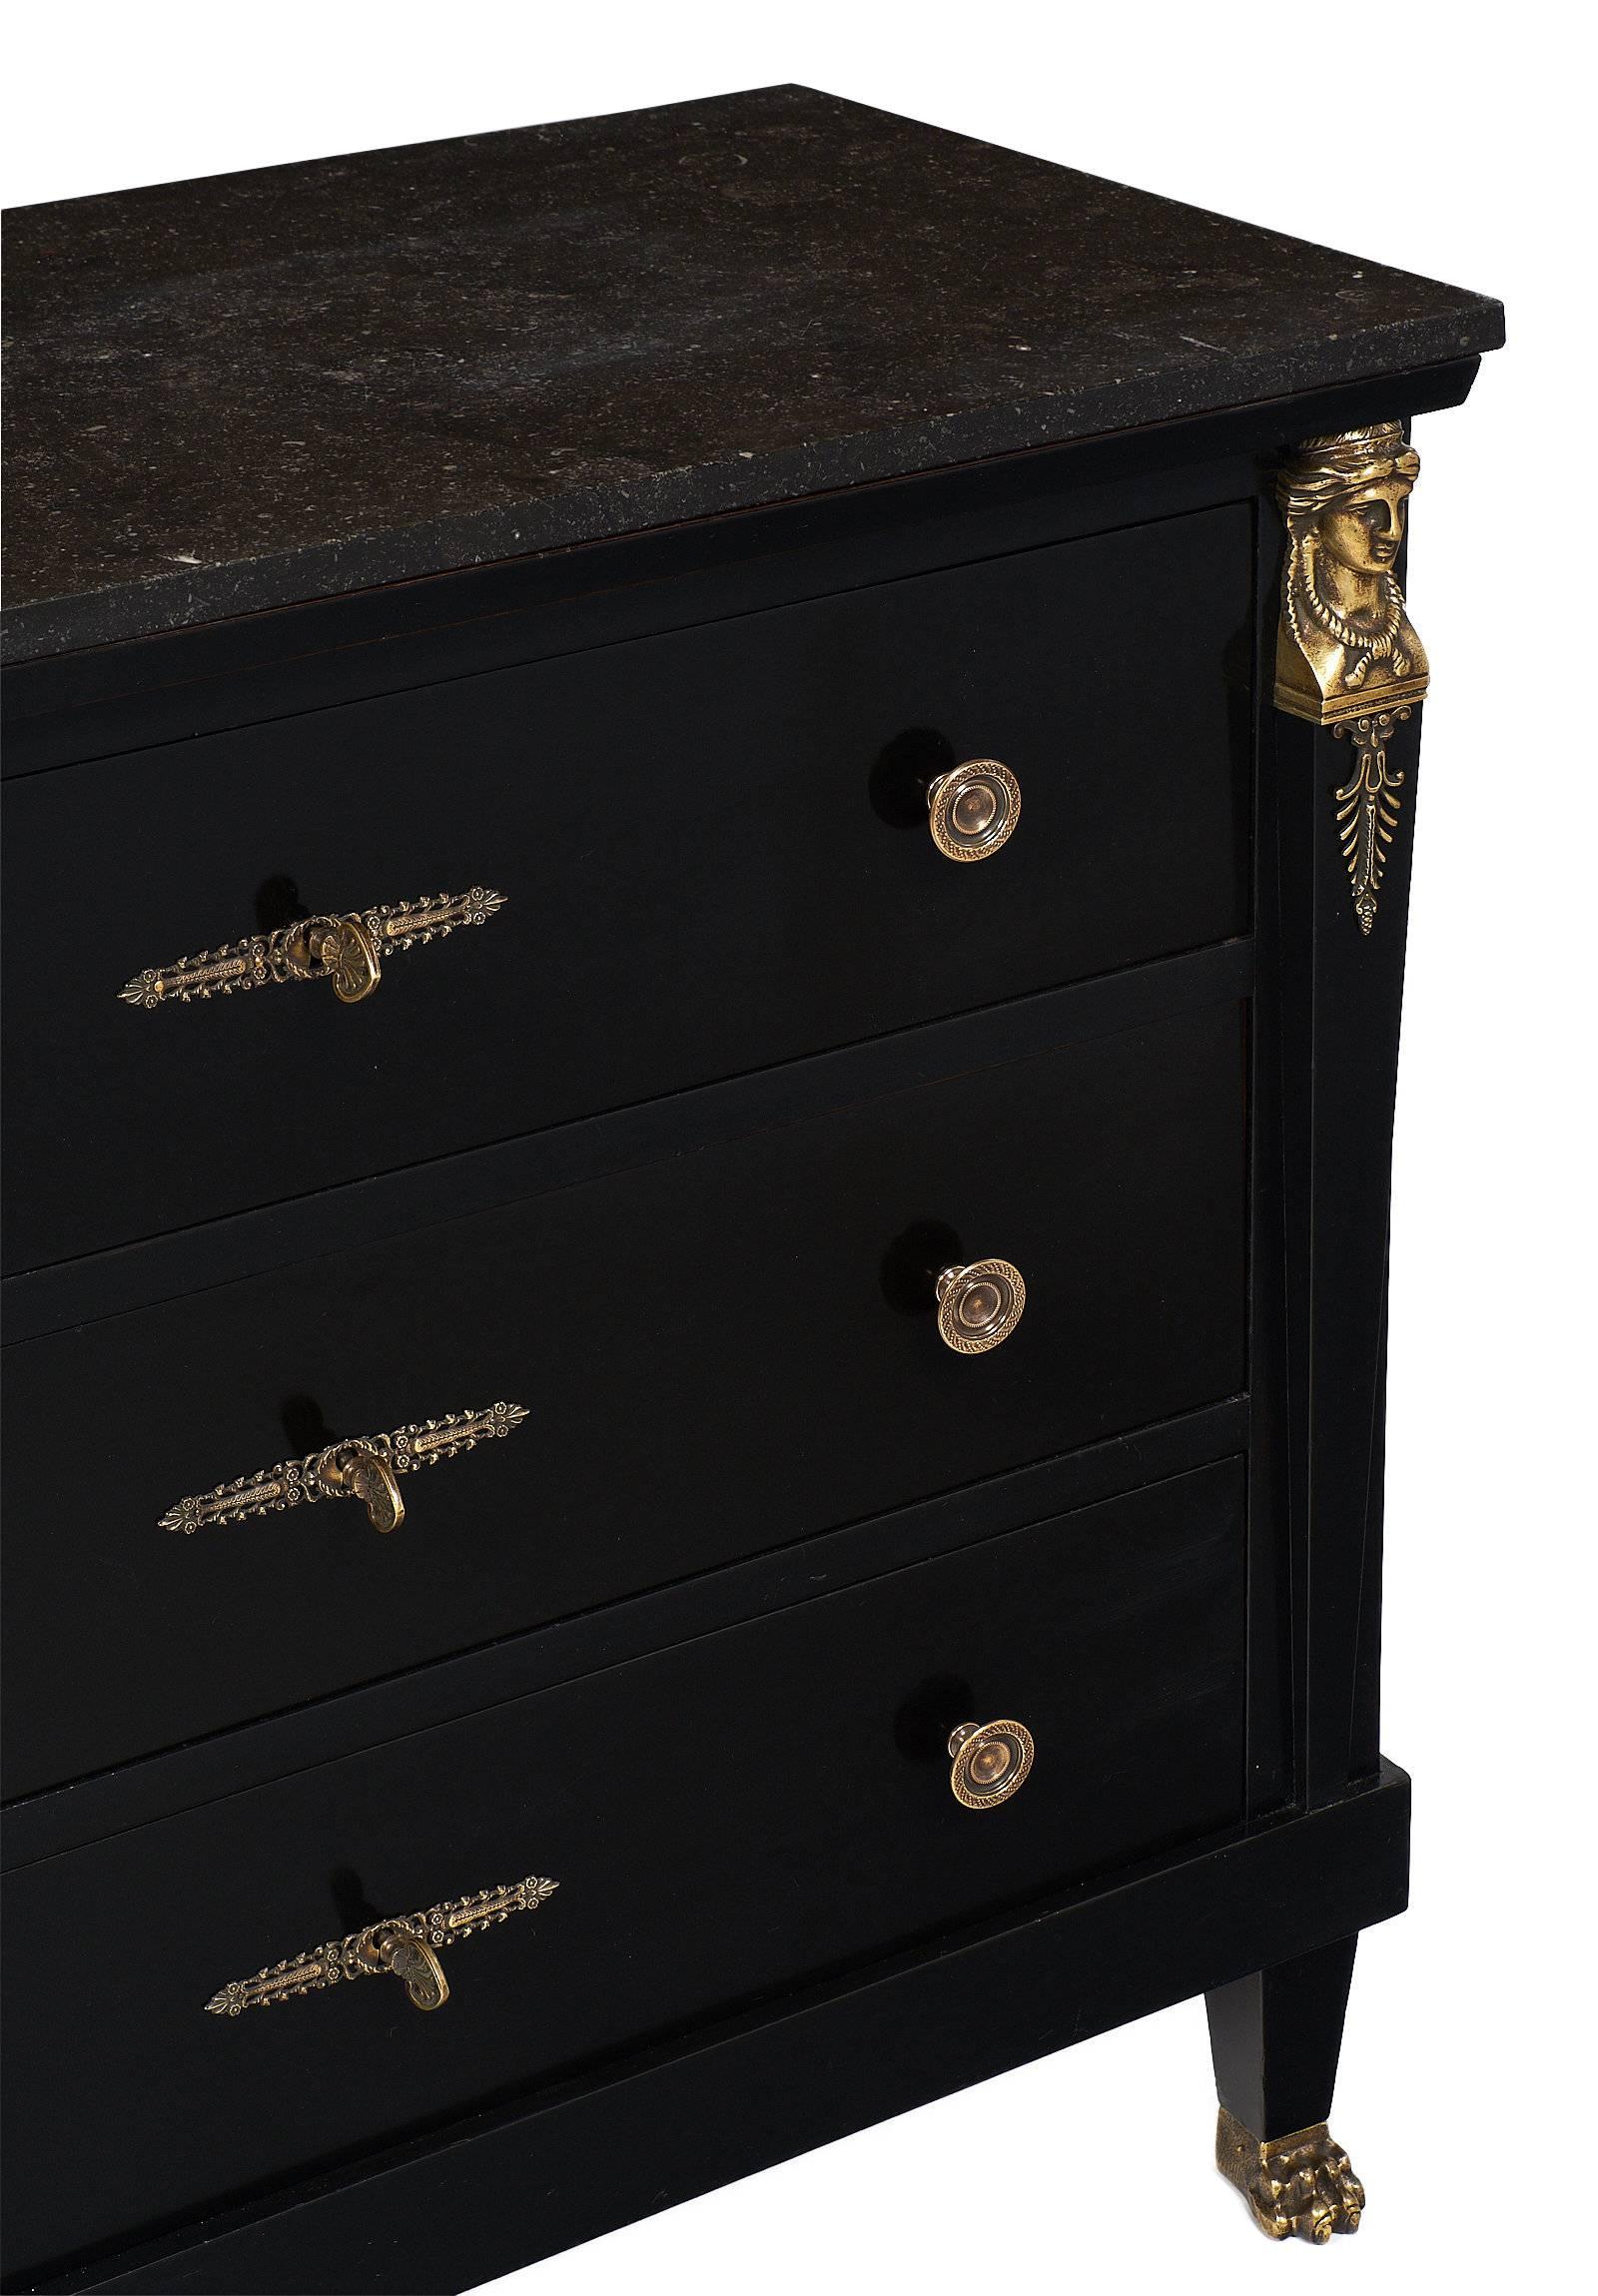 Bronze Black Marble-Topped Empire Style Chest